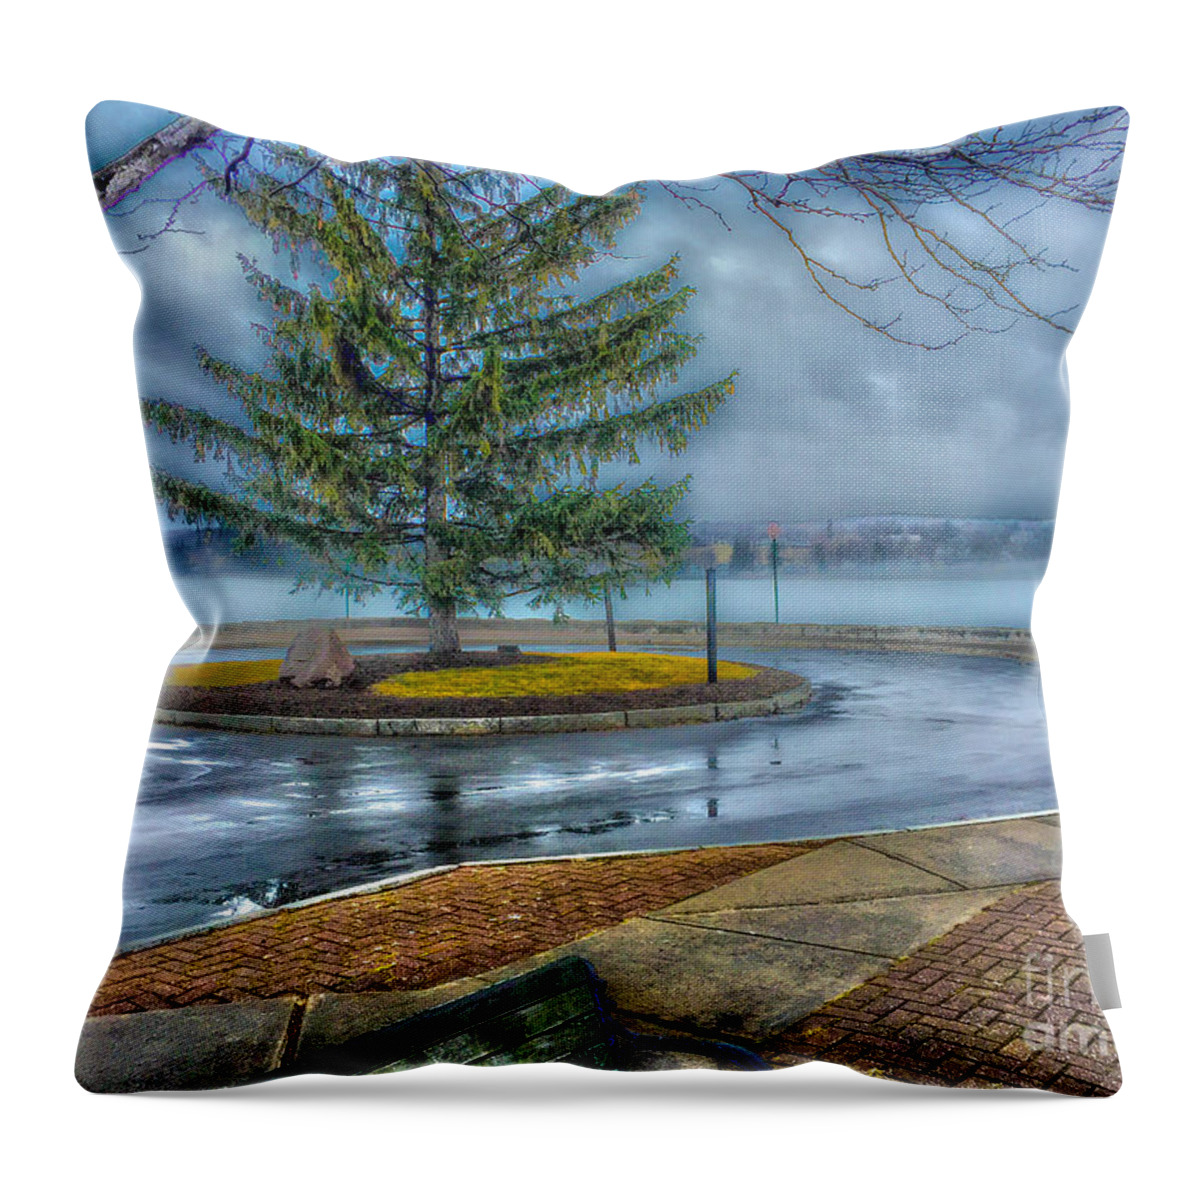 Fog Throw Pillow featuring the photograph Lake Fog by William Norton